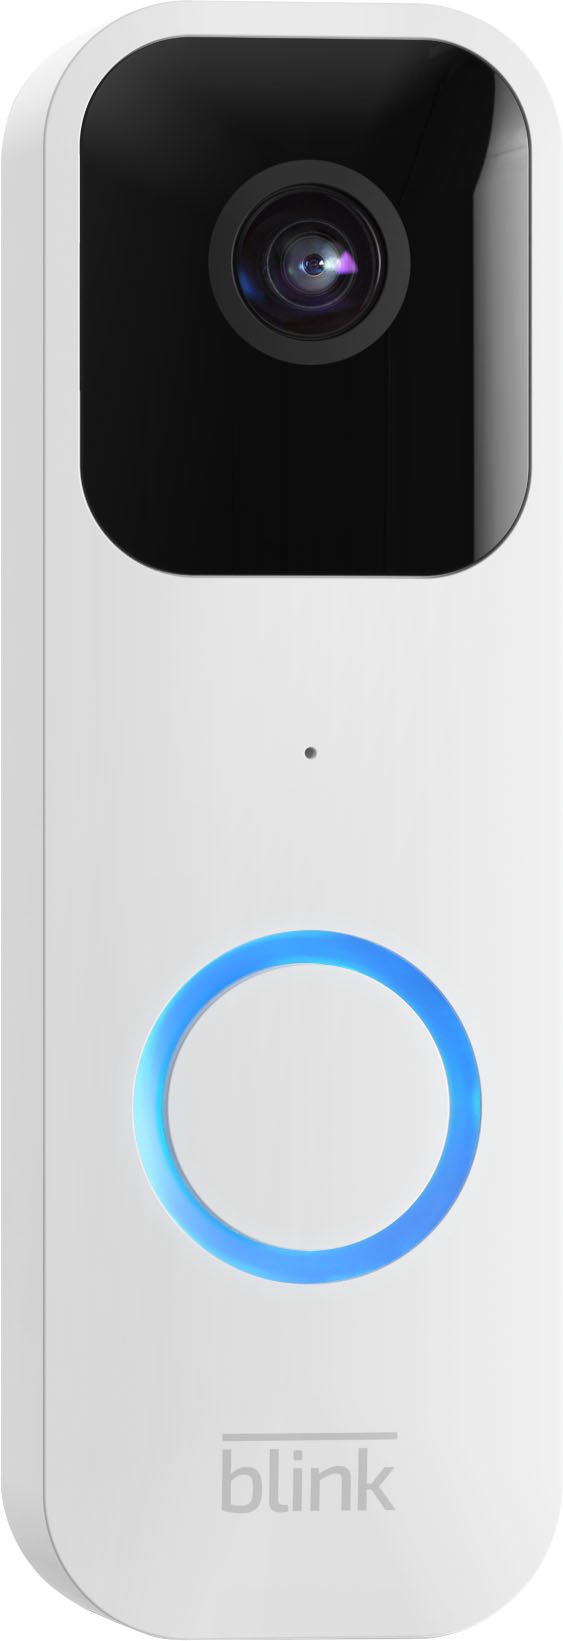 Blink - Video Doorbell - Wired or wire free, Two way audio, HD video and Alexa Enabled - White